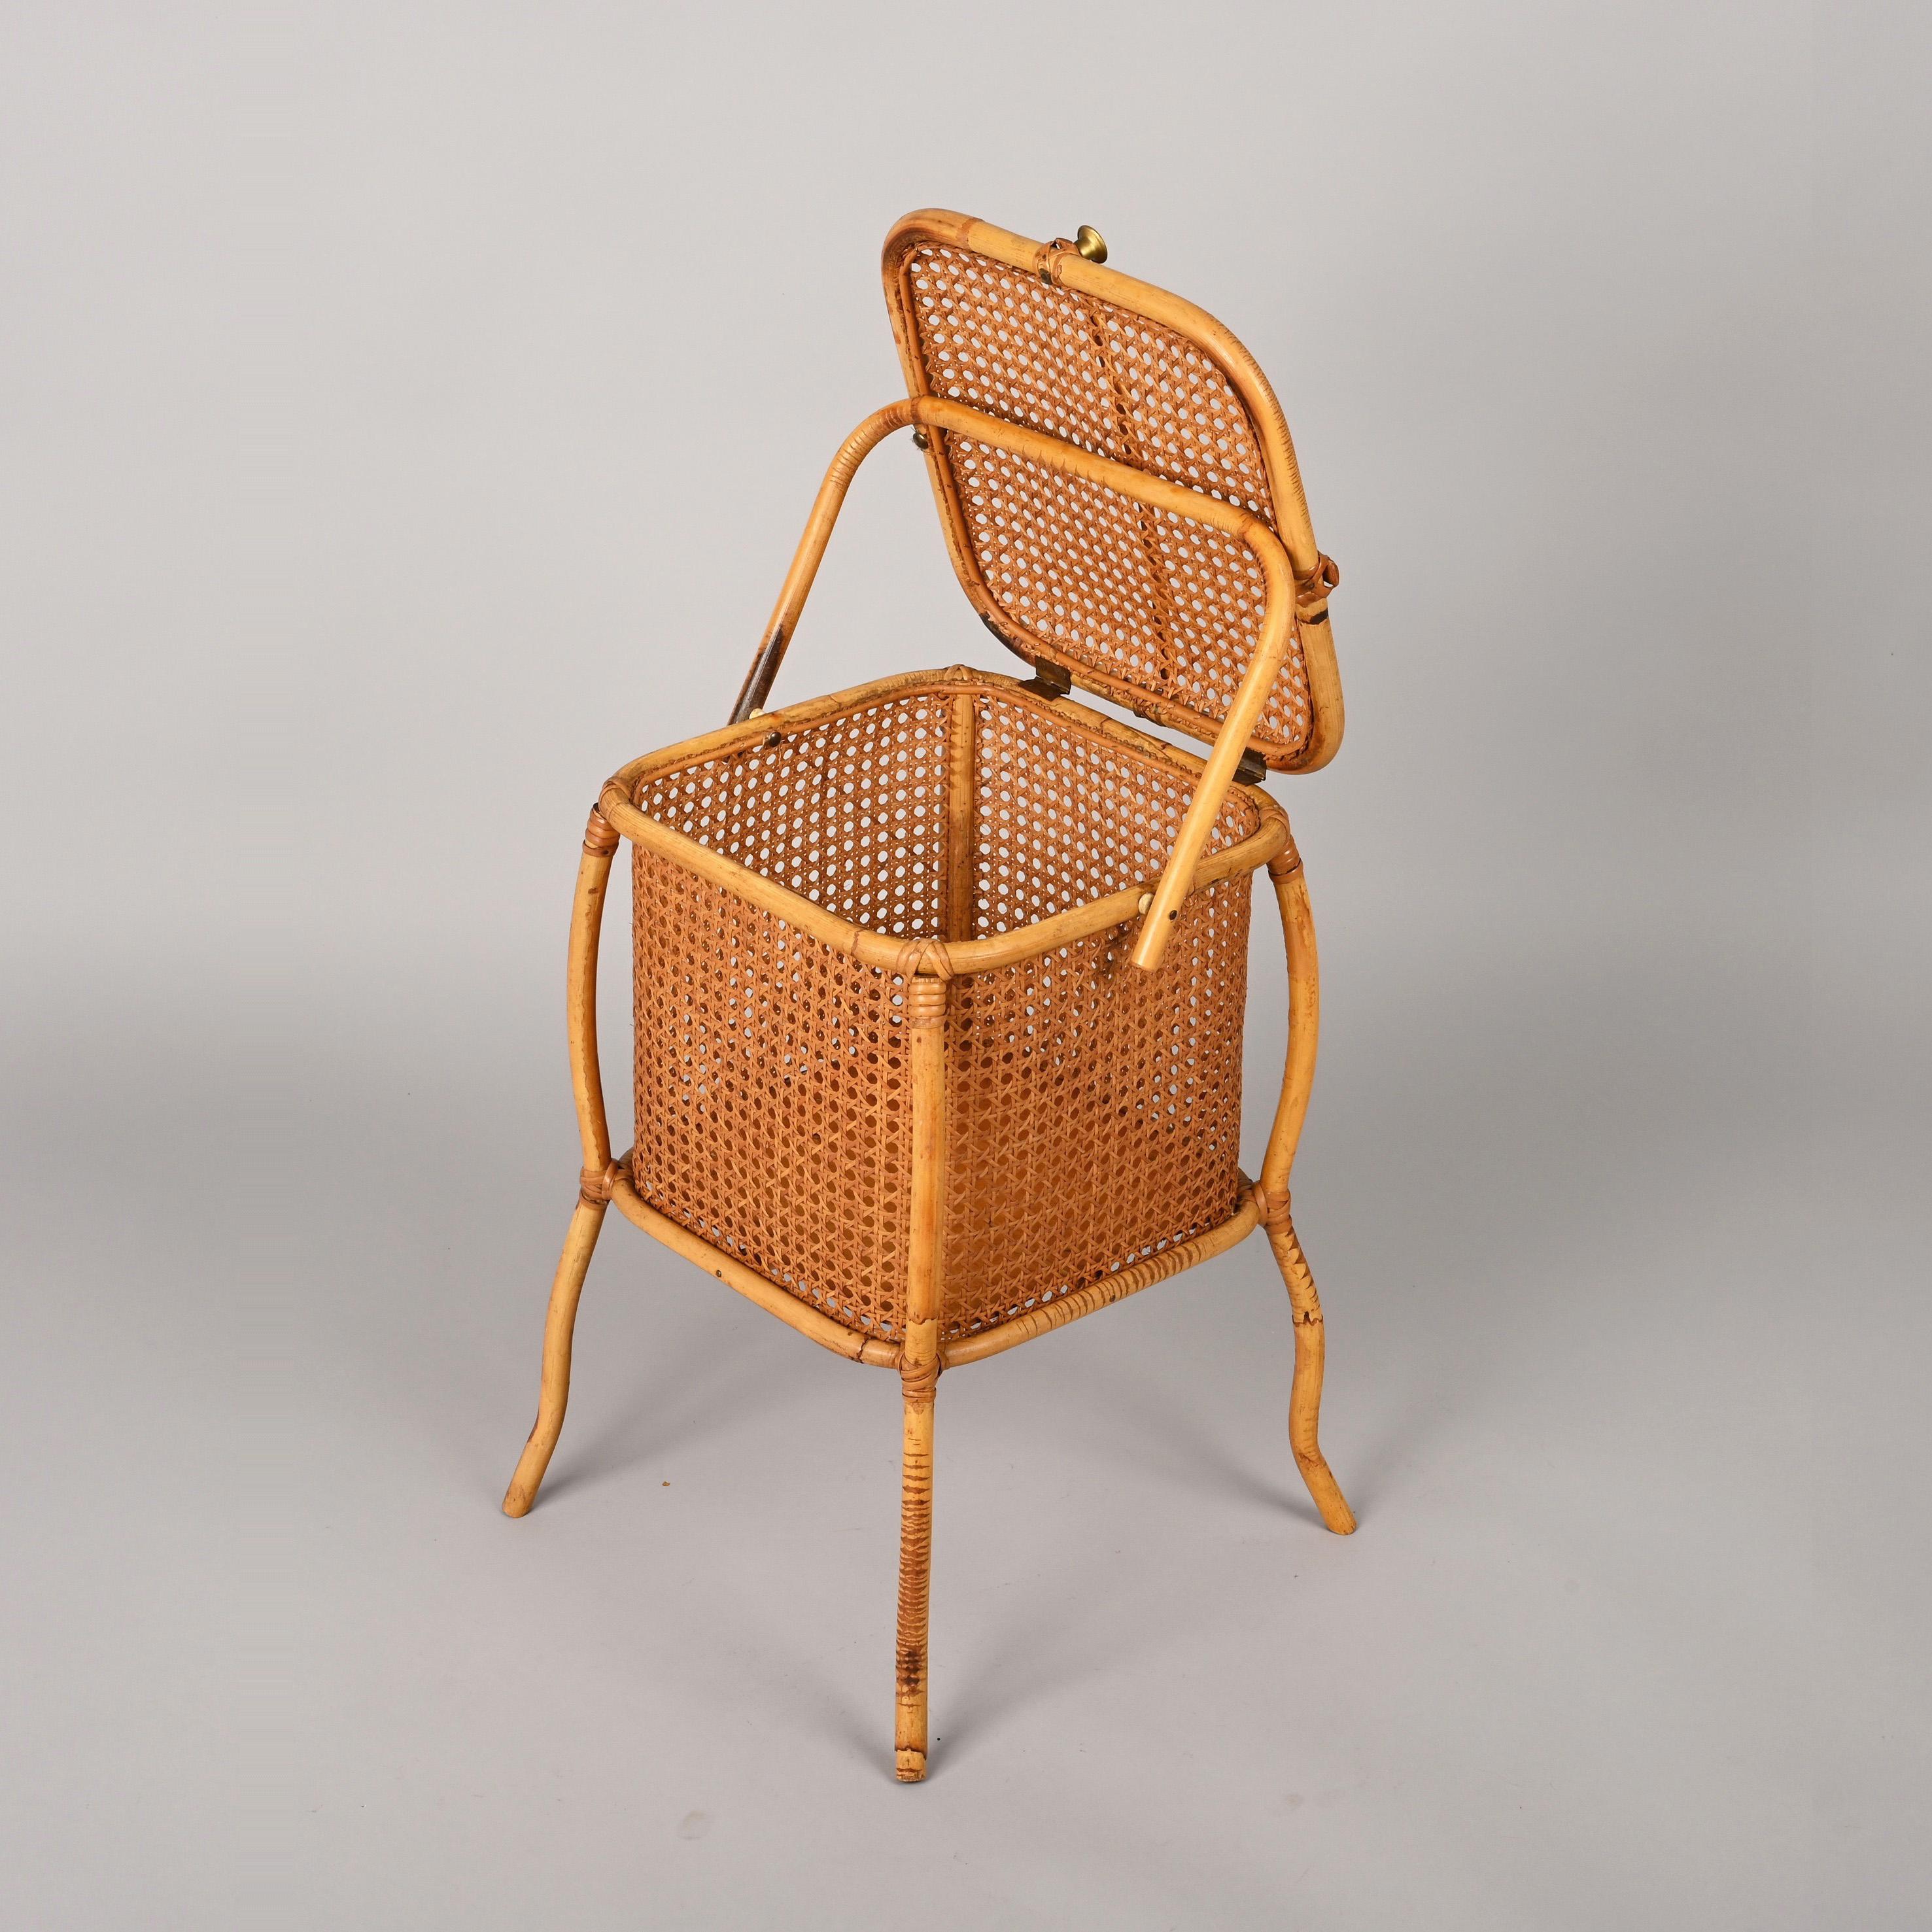 Midcentury Bamboo, Wicker and Vienna Straw Cubic Italian Magazine Basket, 1960s For Sale 3